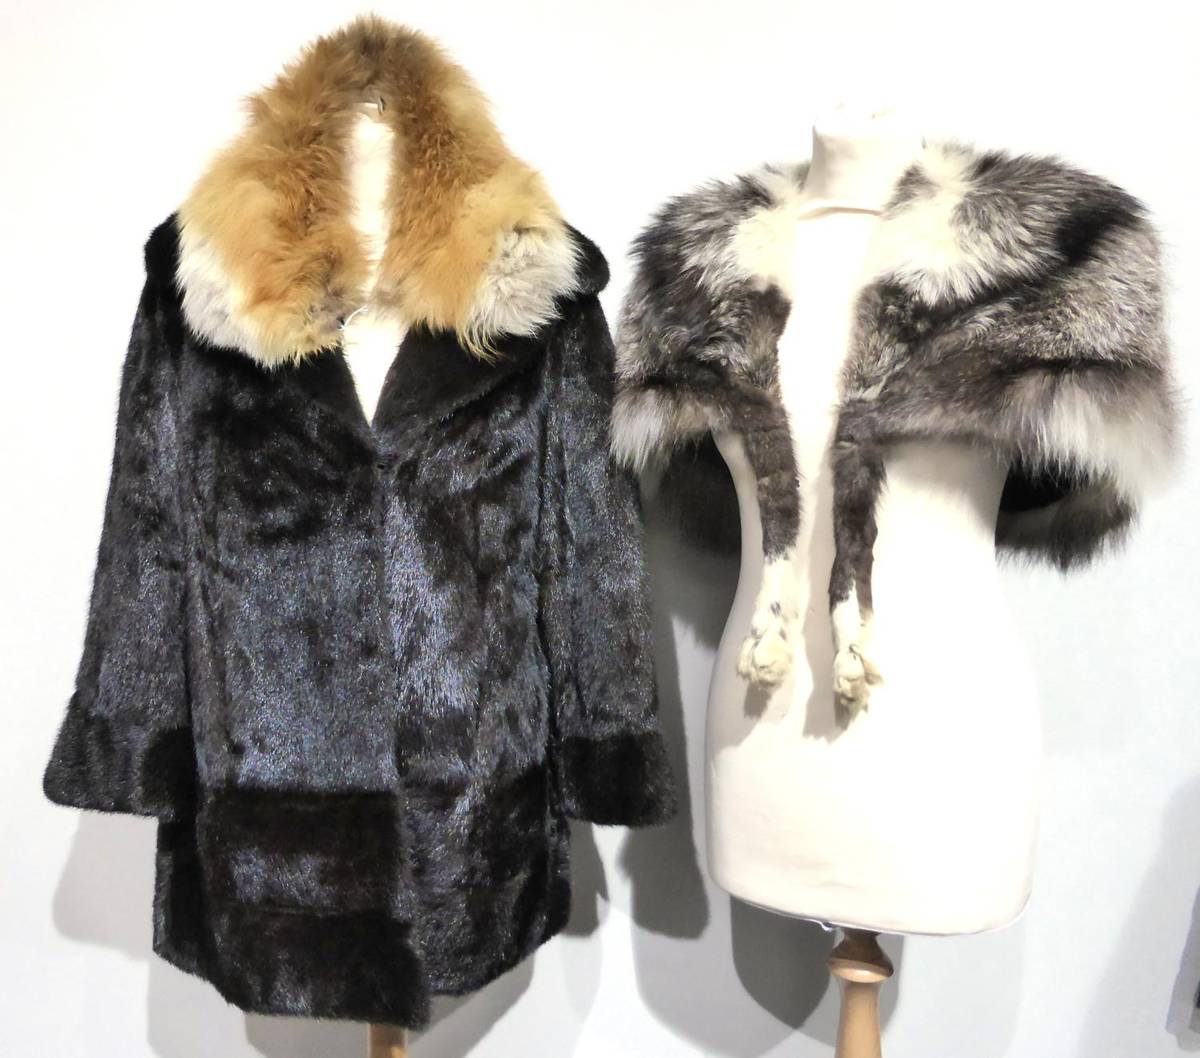 Lot 2116 - Dark Brown Mink Jacket with side pockets and fully lined with embroidered detailing; Silver Fox Fur